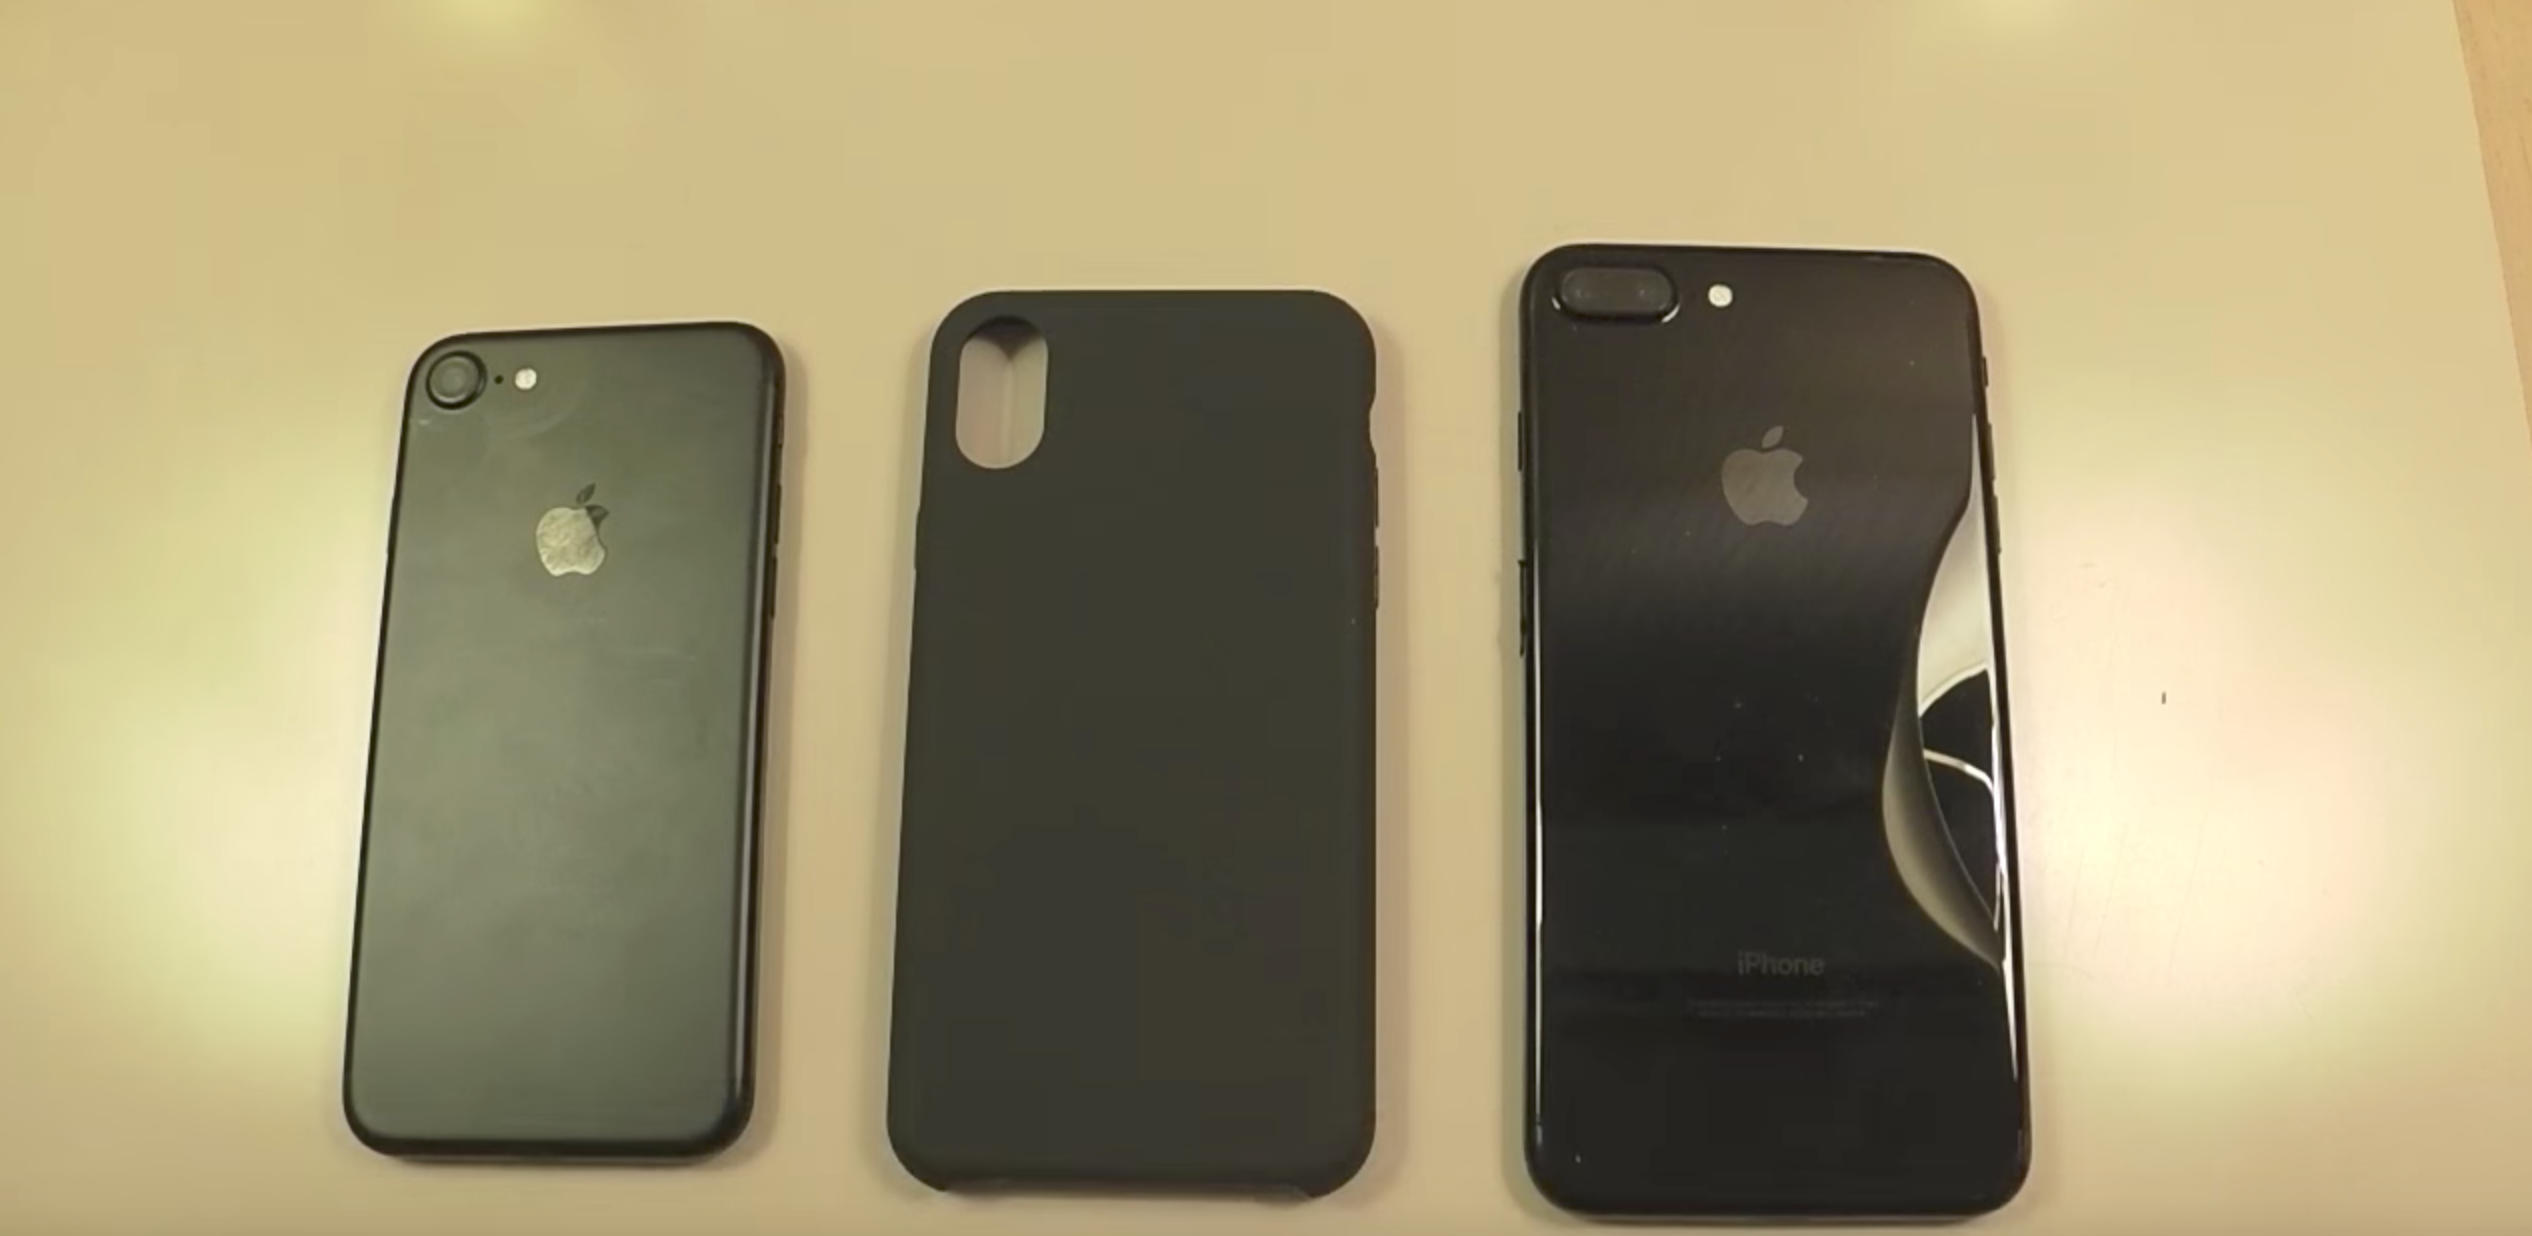 8 case leak claims to show device compared iPhone 7 & iPhone 7 [Video] - 9to5Mac